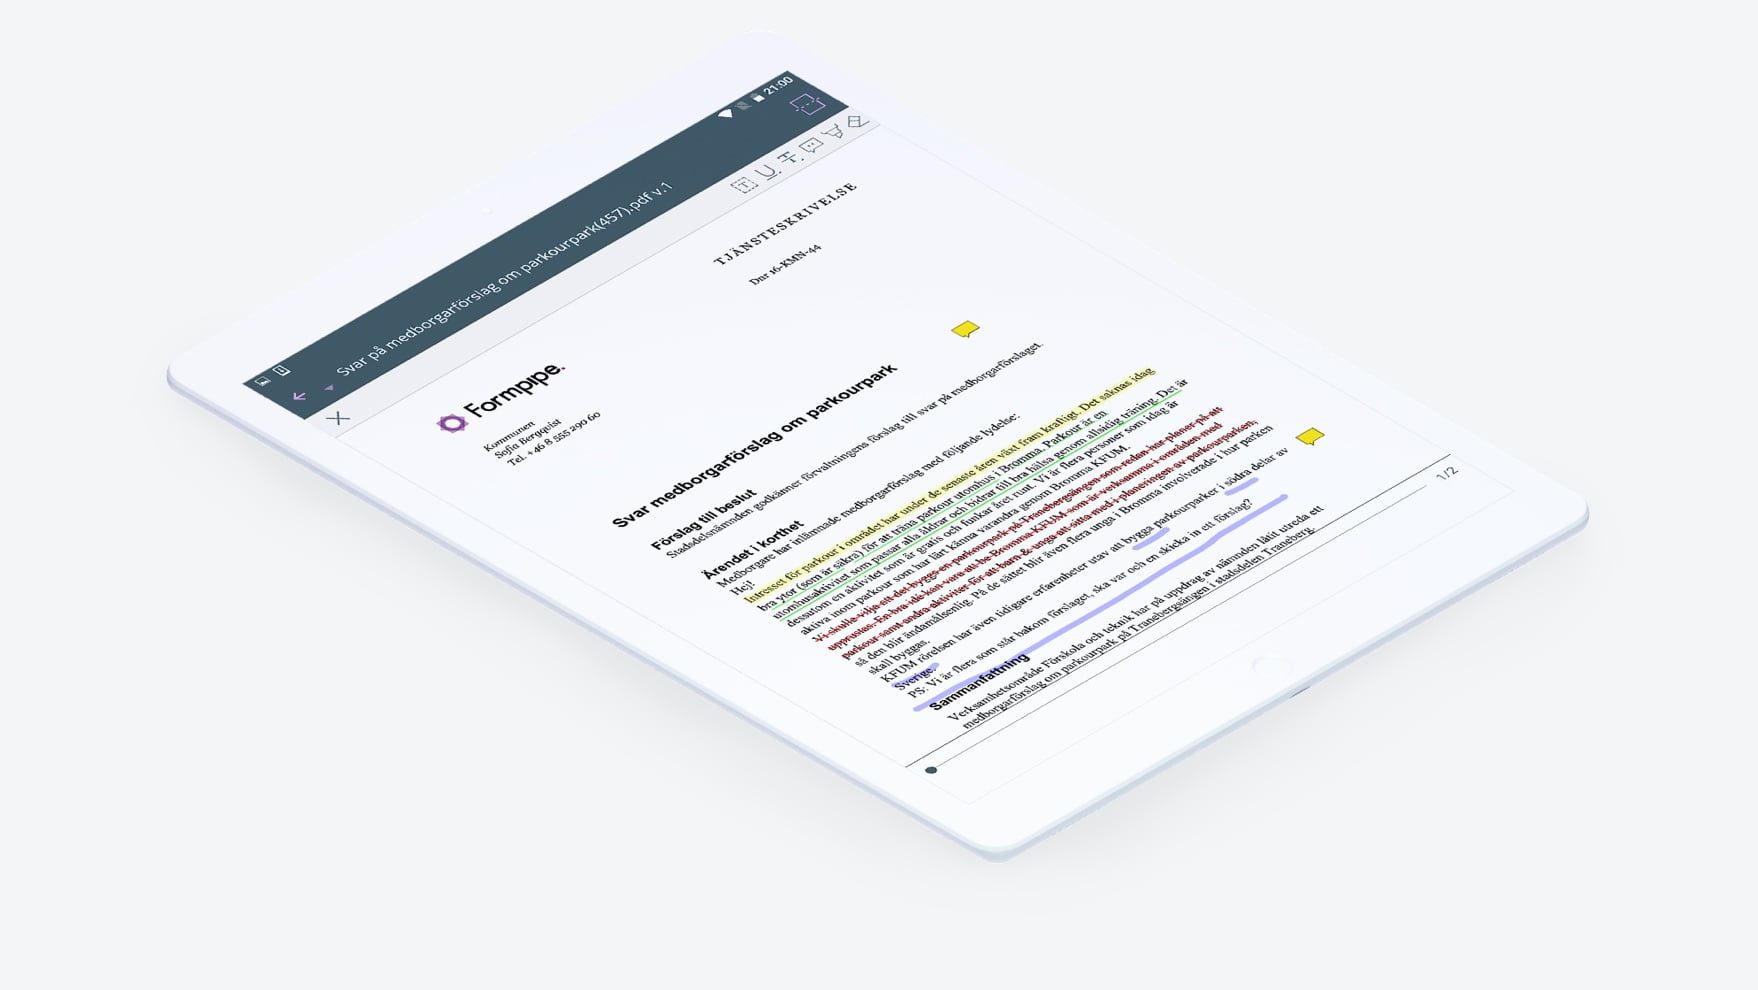 Rich in-app tools for highlighting and annotations